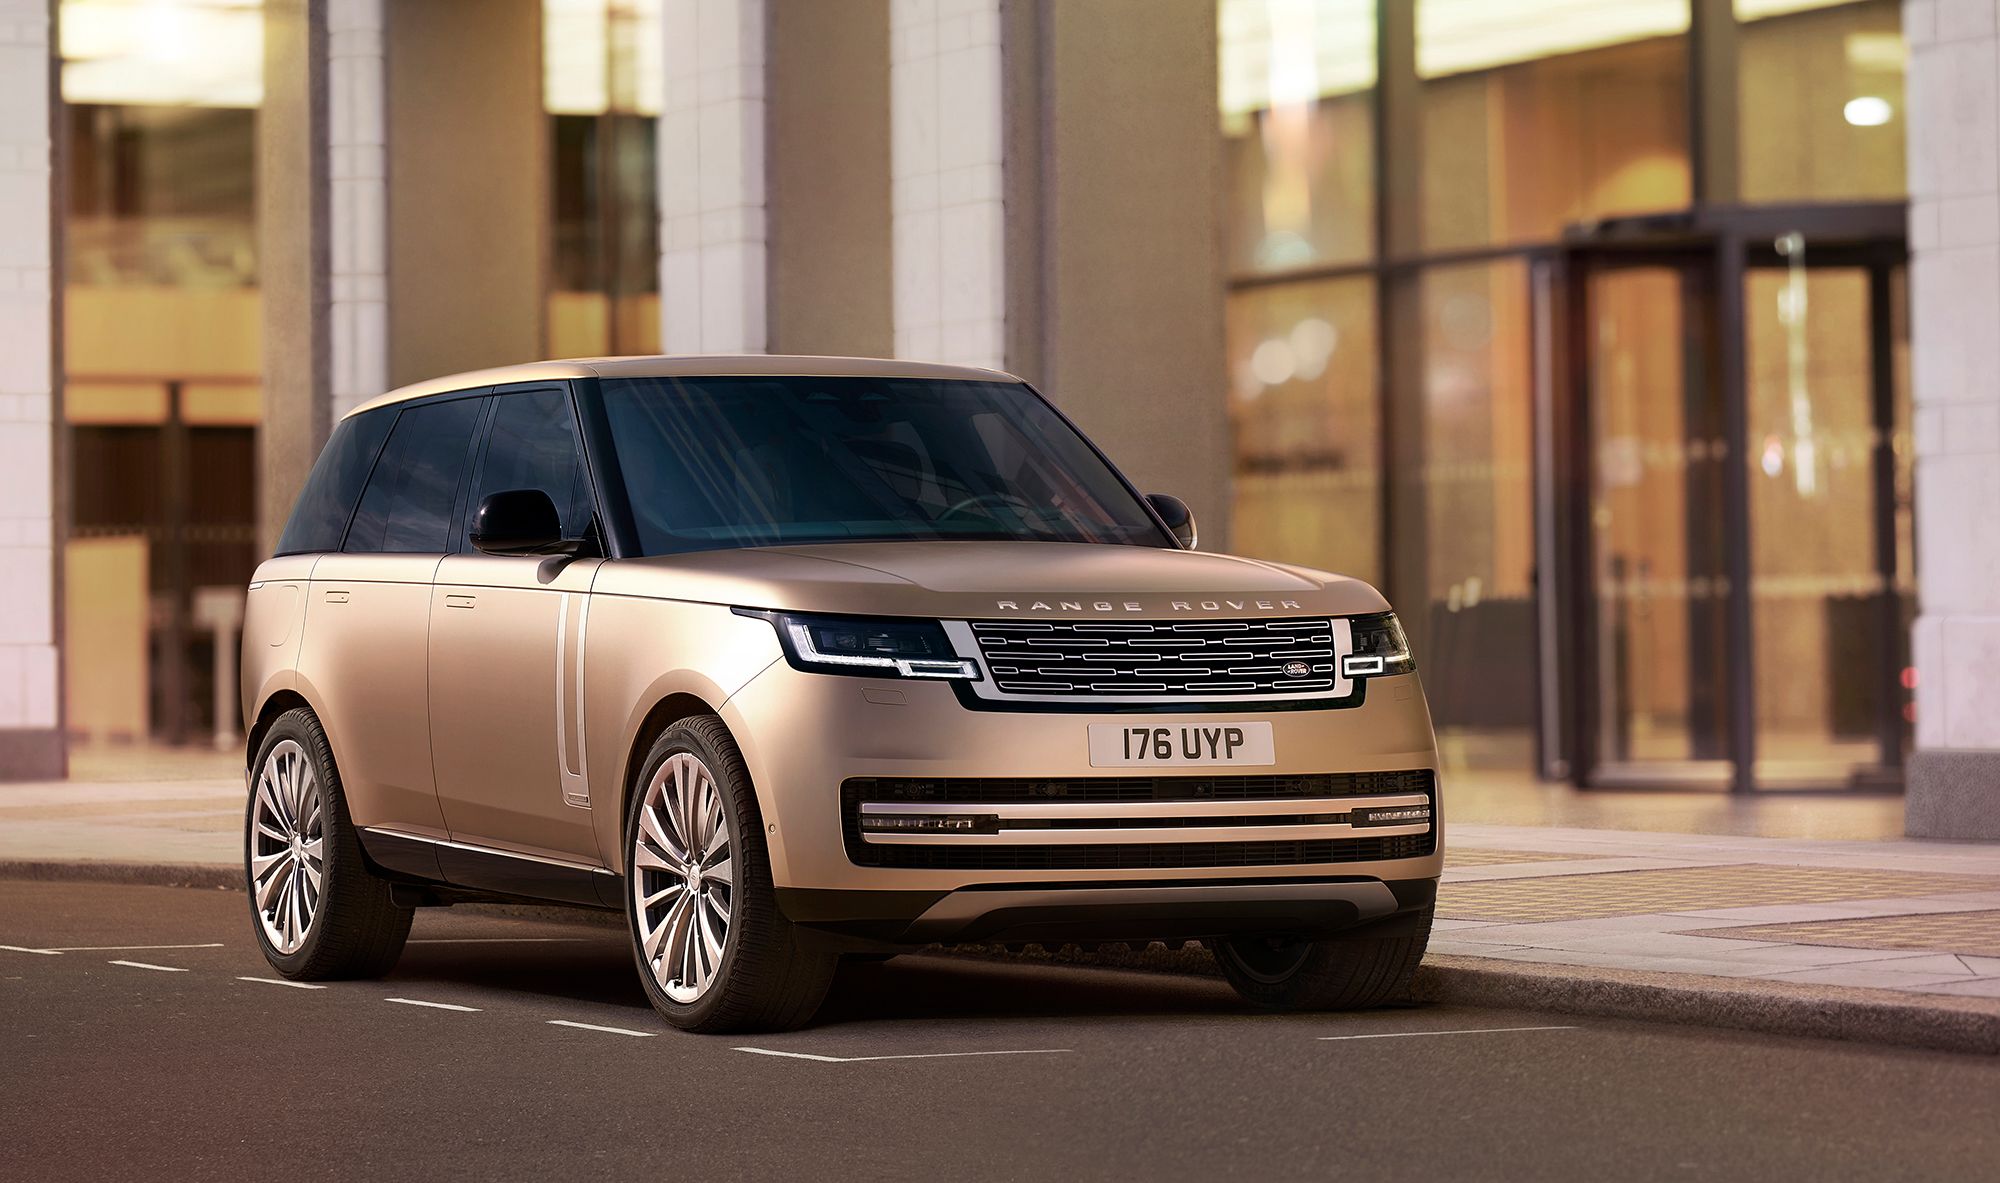 Steken Tactiel gevoel Er is behoefte aan The first new Range Rover in a decade faces tougher competition | CNN  Business